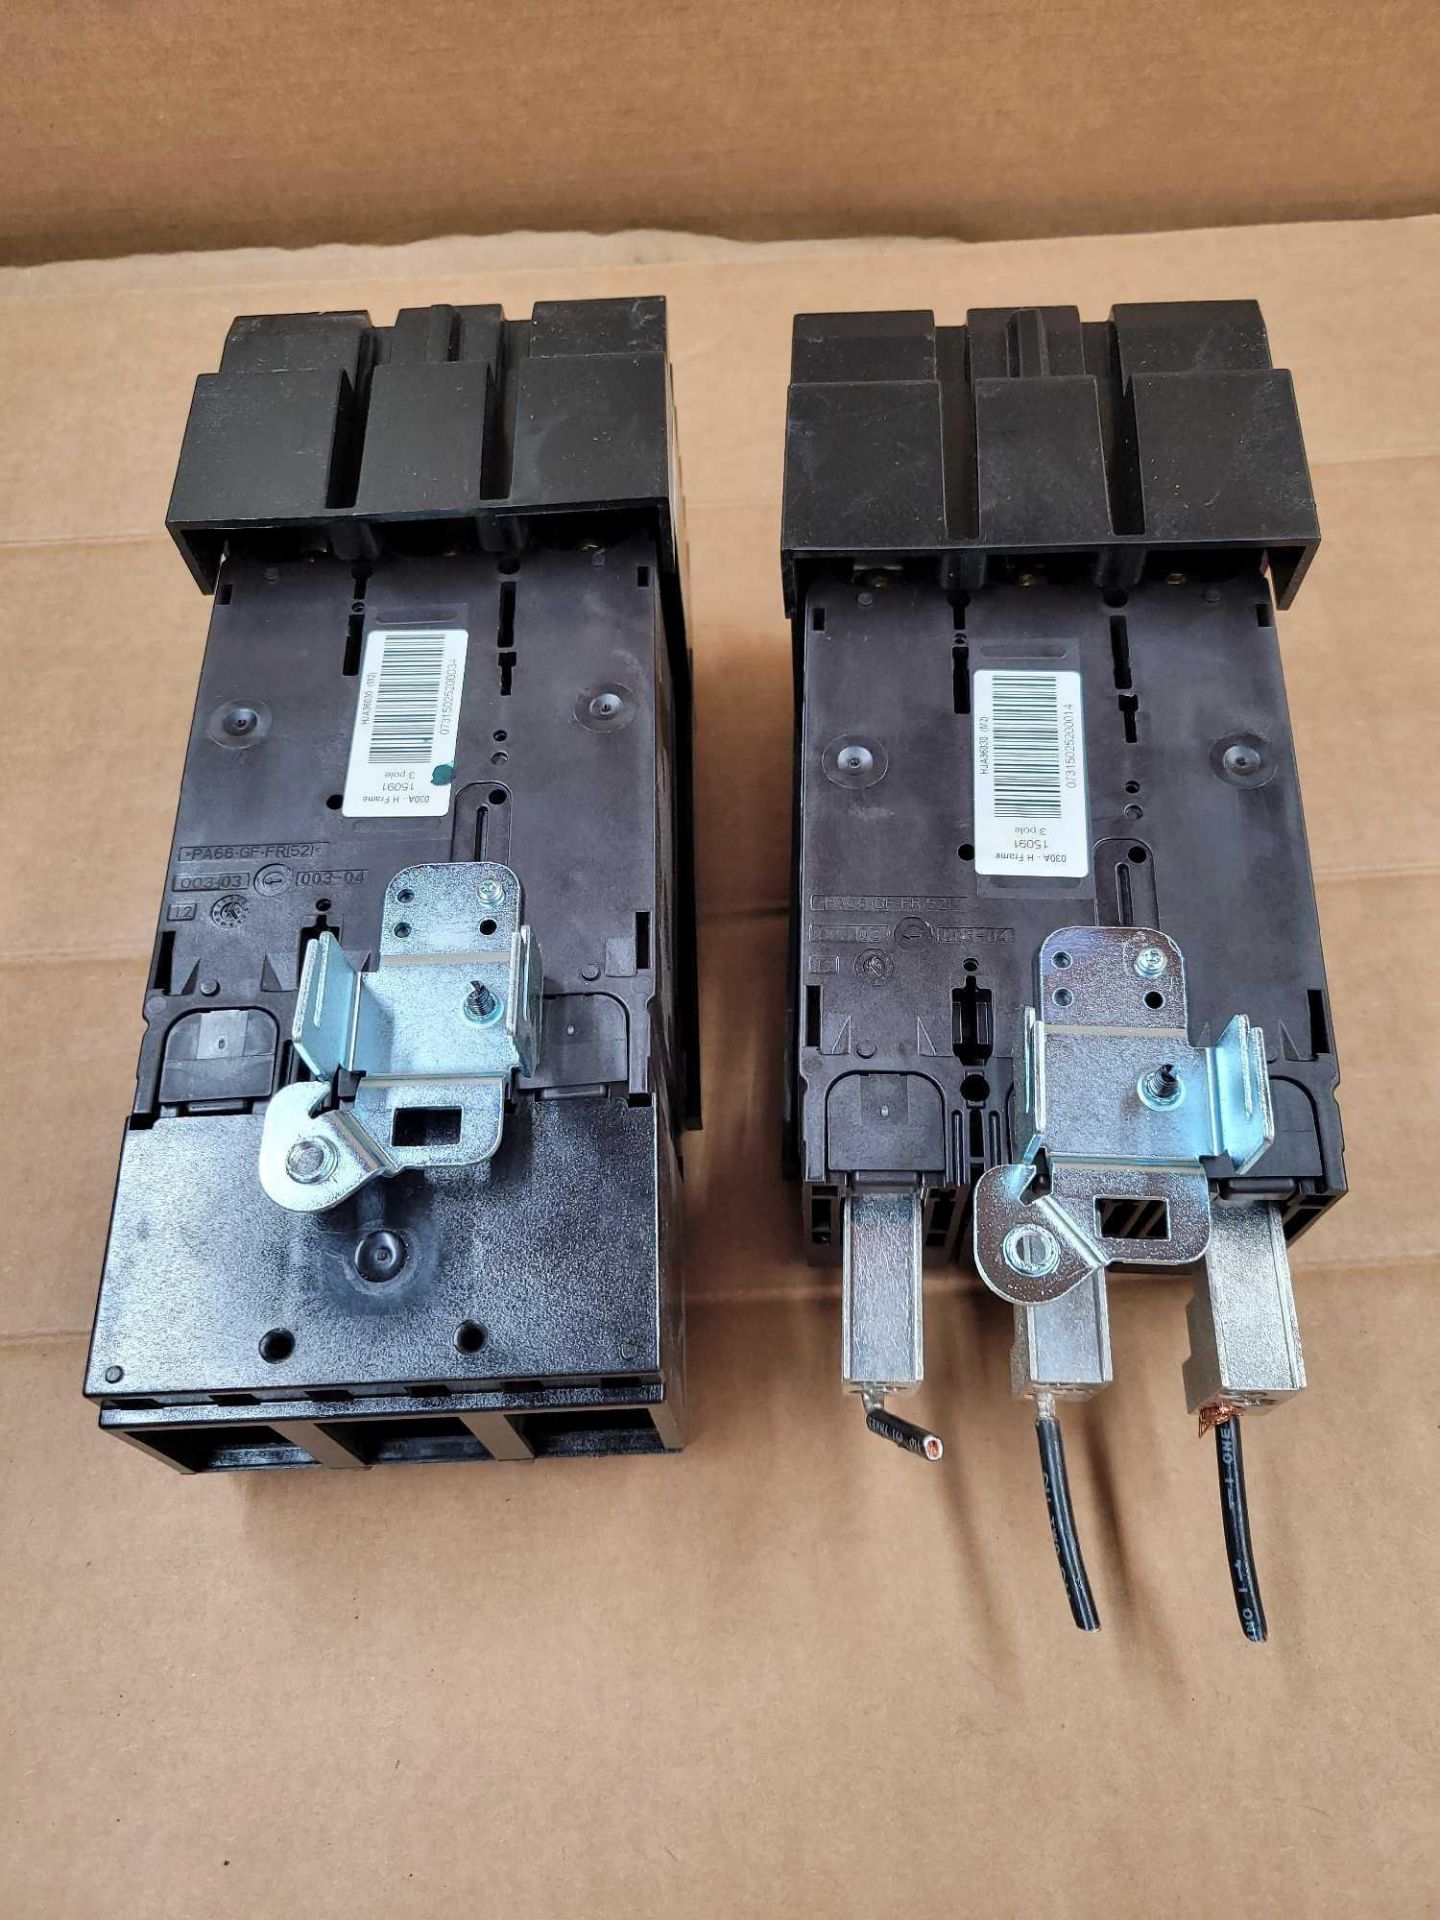 LOT OF 2 SQUARE D HJA36030 / 30 Amp Molded Case Circuit Breaker  /  Lot Weight: 9.6 lbs - Image 5 of 6